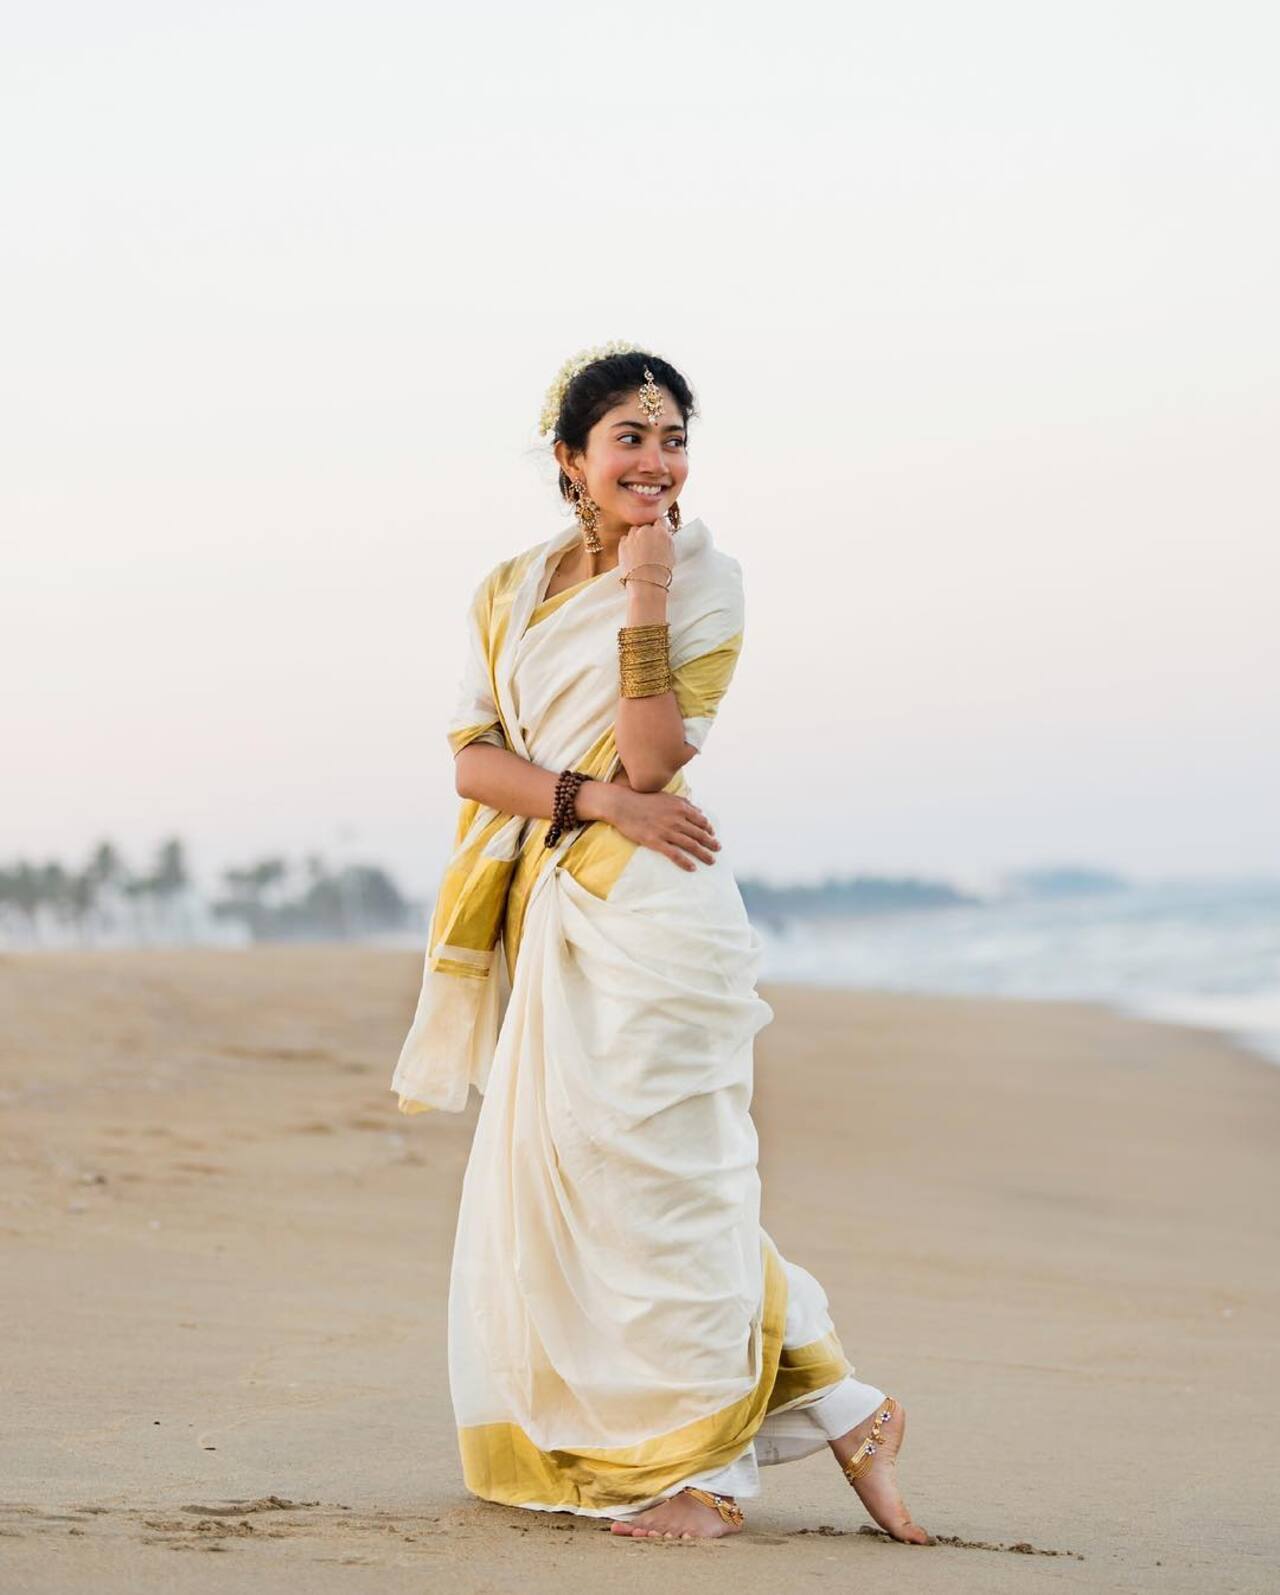 Sai Pallavi dons the traditional Kerala saree which is a must-have in your wardrobe and can be used for any Indian festive occasion